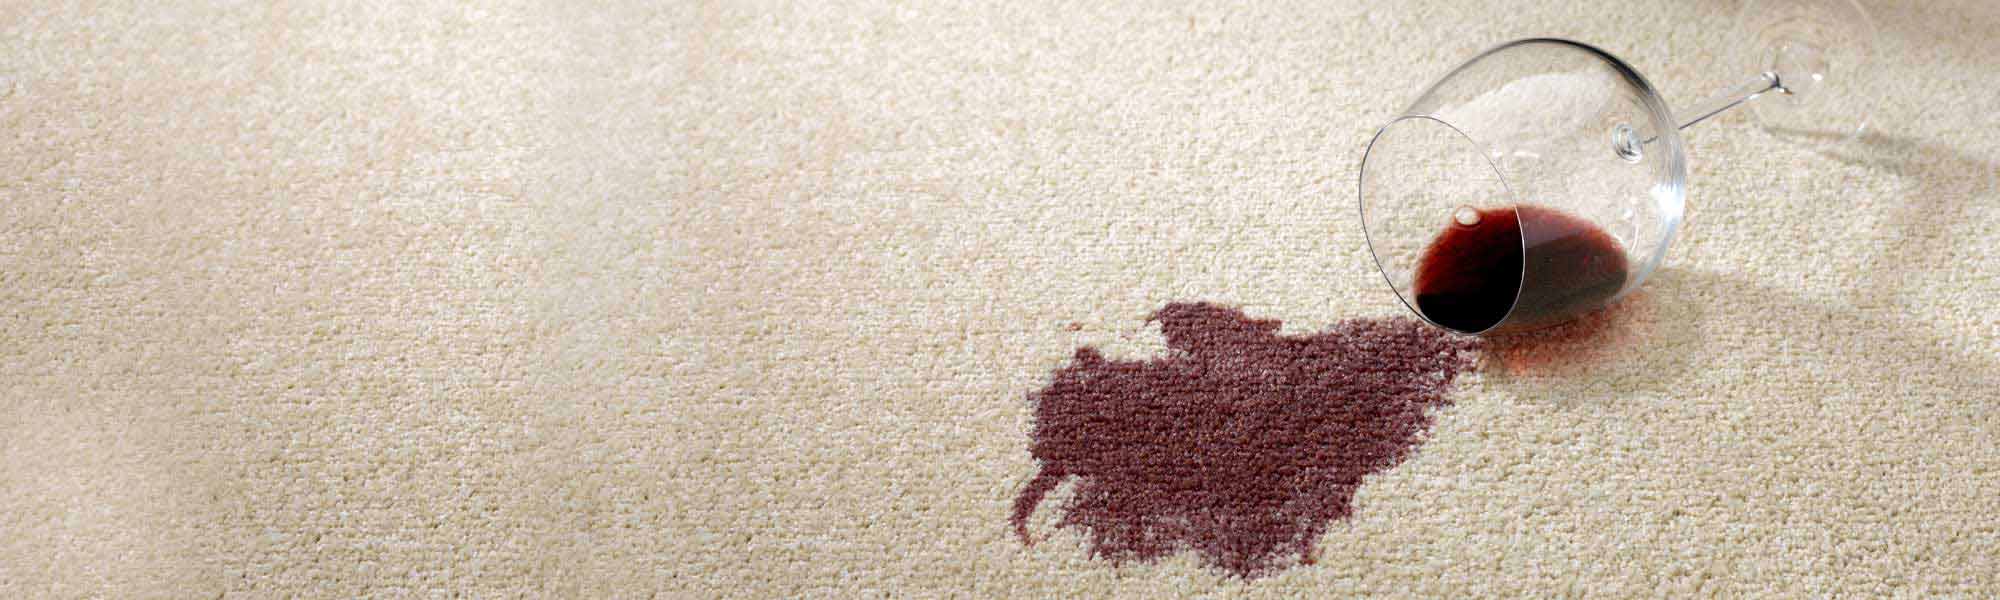 Professional Stain Remover by Shirley's Chem-Dry in Kokomo and Tipton IN